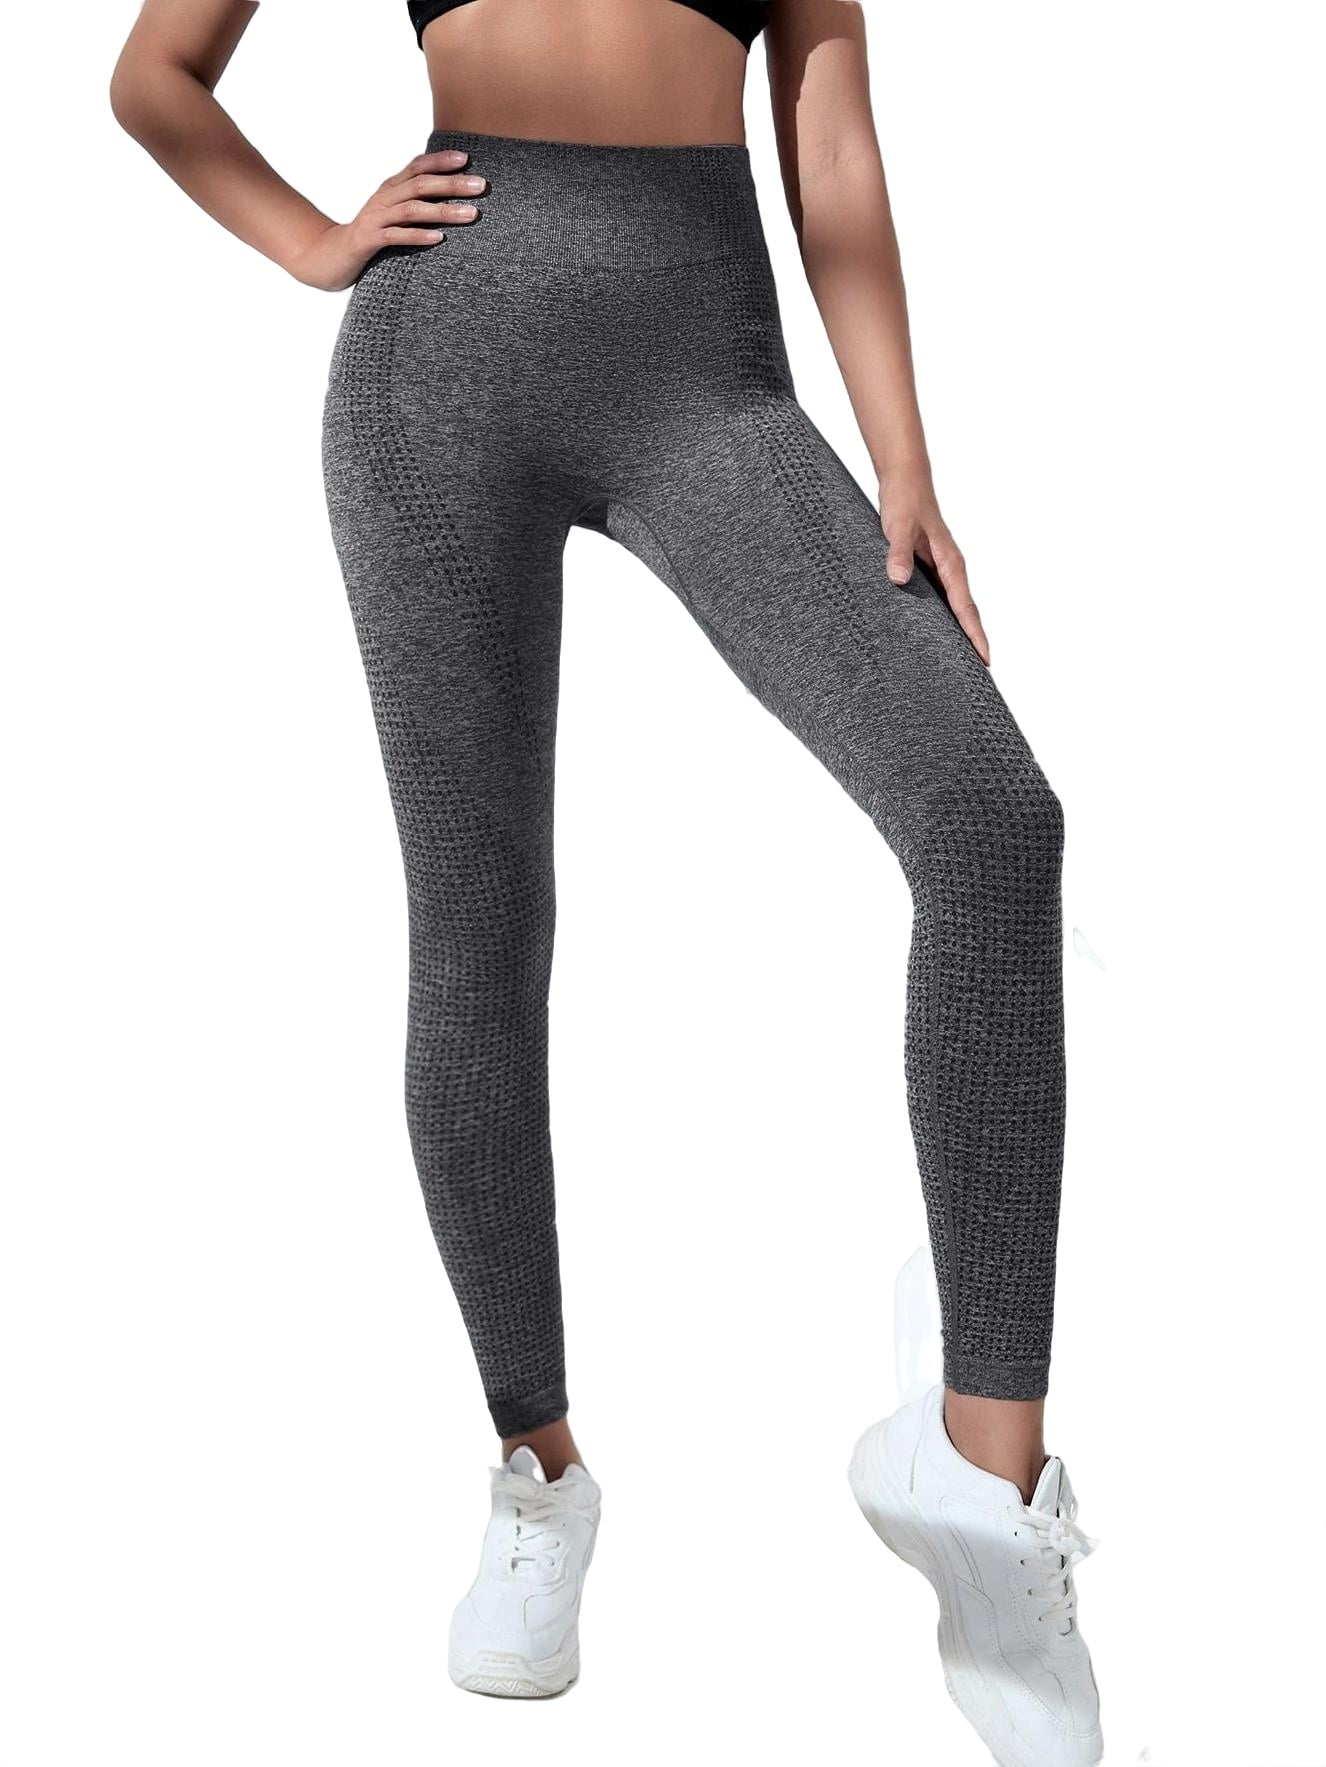 High Waisted Sports Pants For Women Knitted Gray Sports Leggings Women's  Joggers Seamless Pants Sport Yoga Fitness Clothing Color: Dark Gray, Size:  S | Uquid shopping cart: Online shopping with crypto currencies